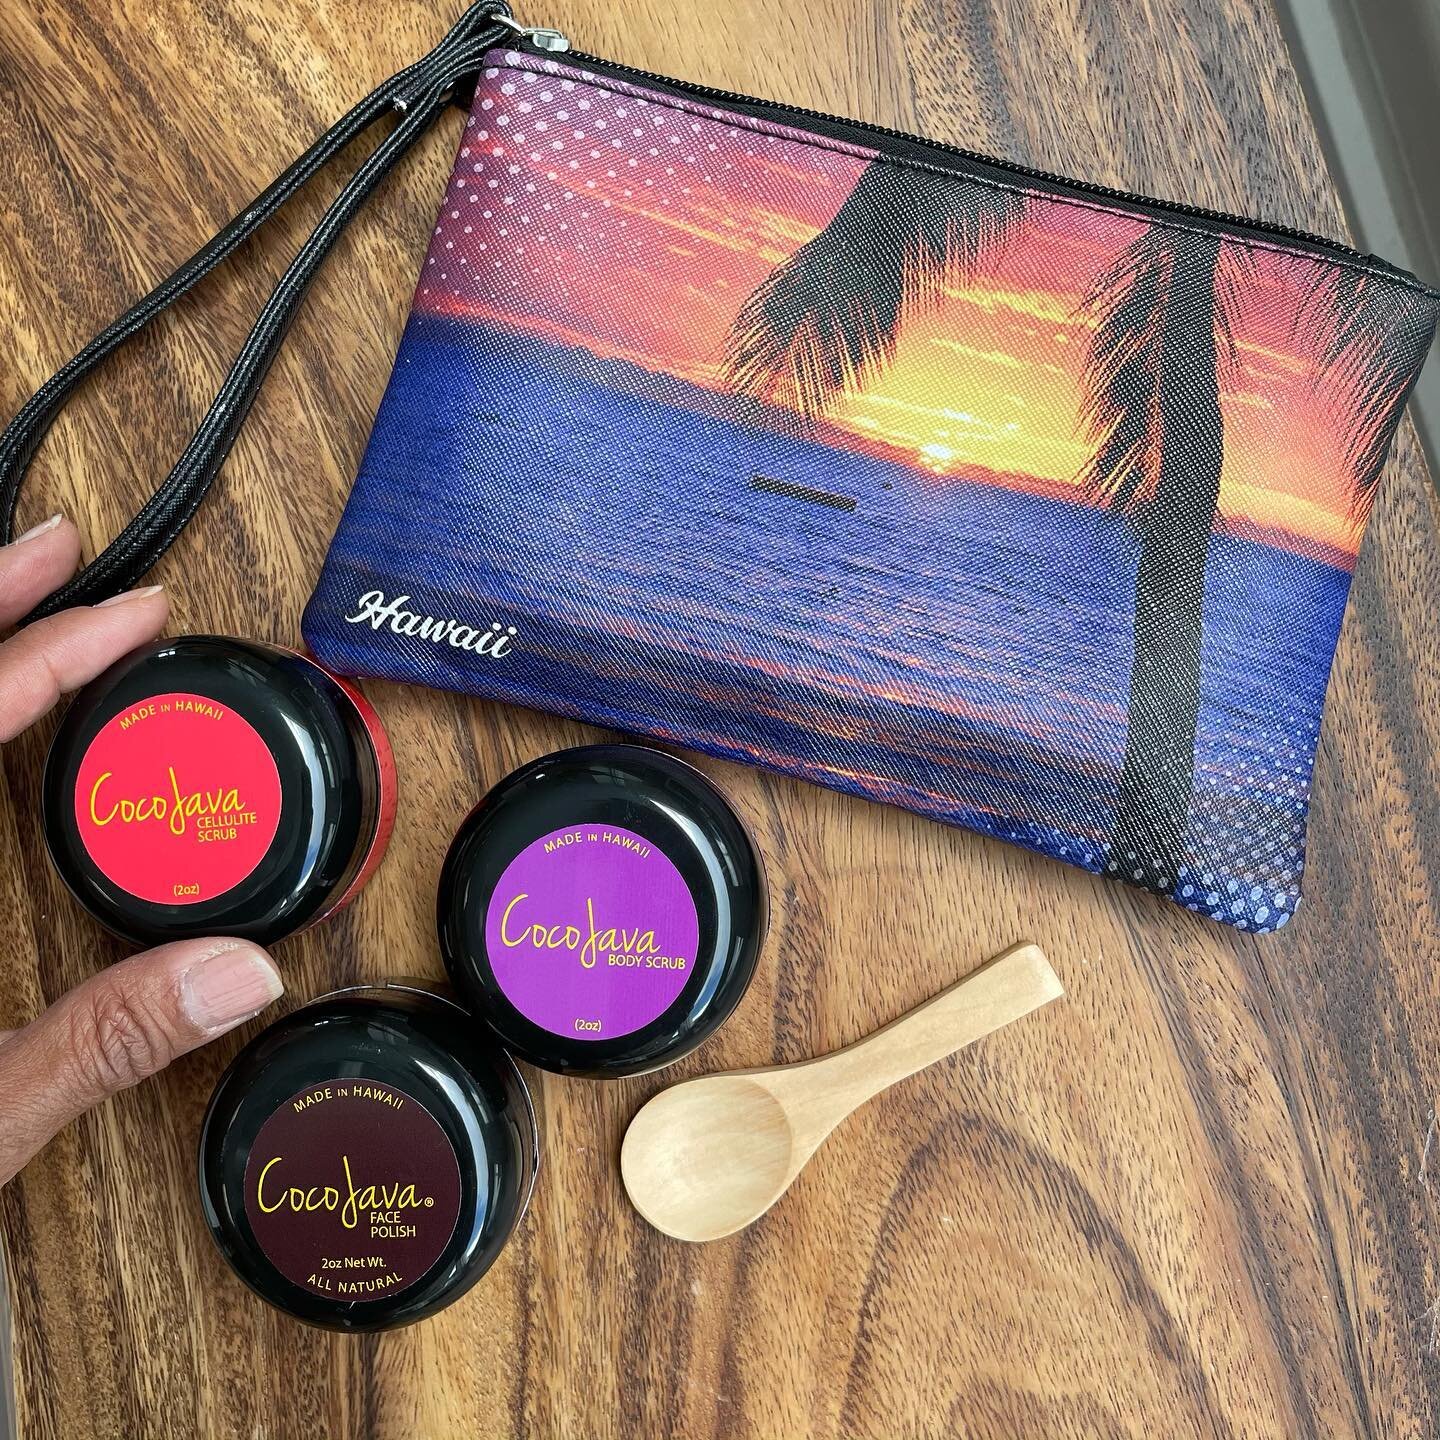 $49 Flash Sale!  Take the entire scrub line everywhere you go with this travel sized set neatly packed in a water resistant pouch with wooden spoon ❤️
.
#madeinhawaii #naturalbeauty #naturalskincare #edible #valeriejoseph